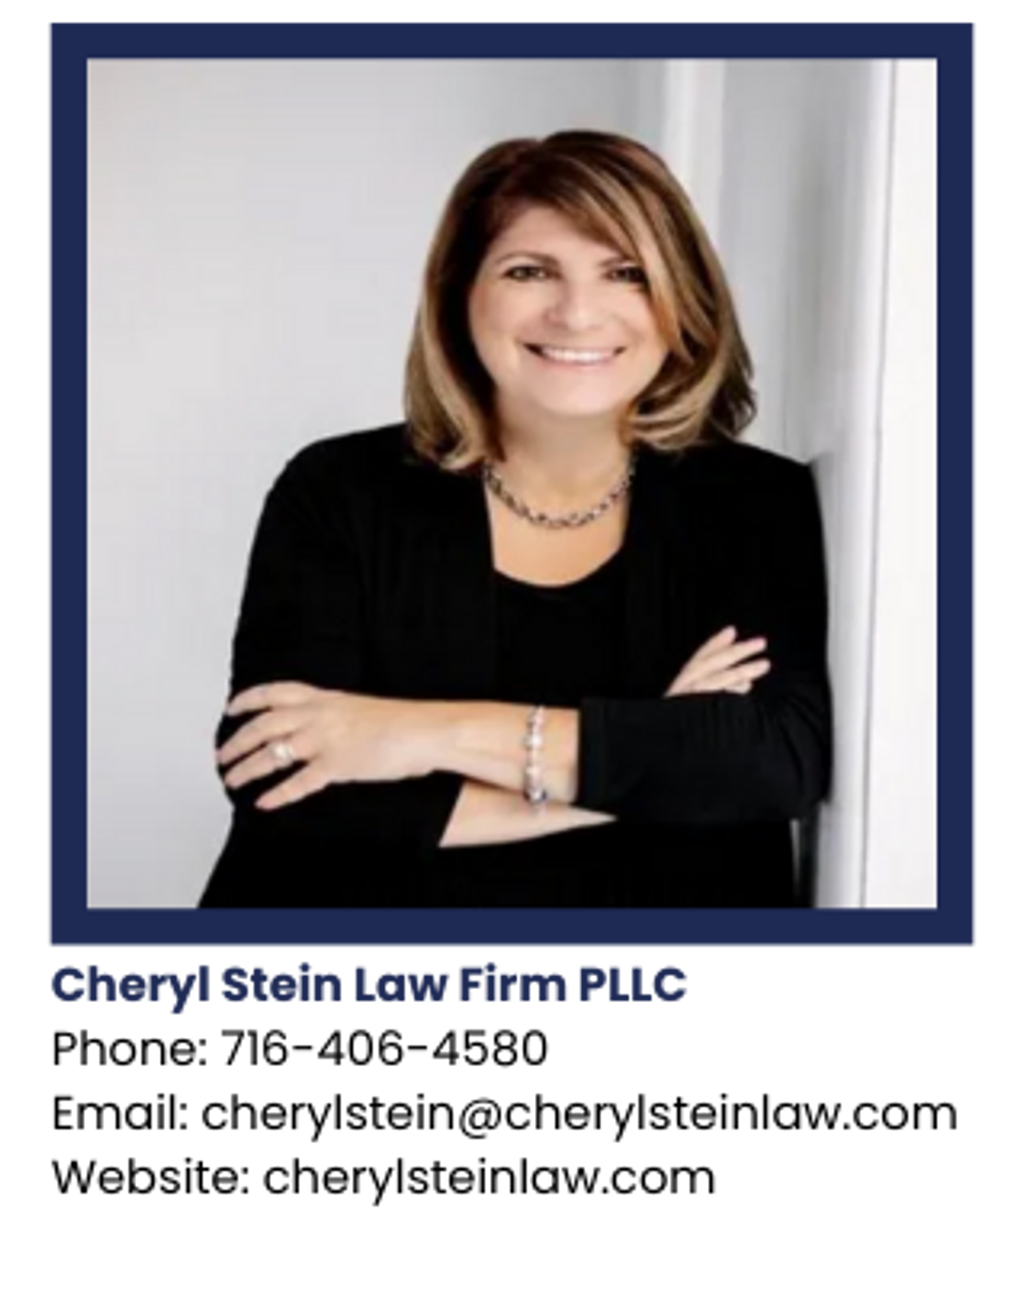 Cheryl Stein Law Firm PLLC
Preferred Attorney Partner
The Carrigan Team-Own NY Real Estate